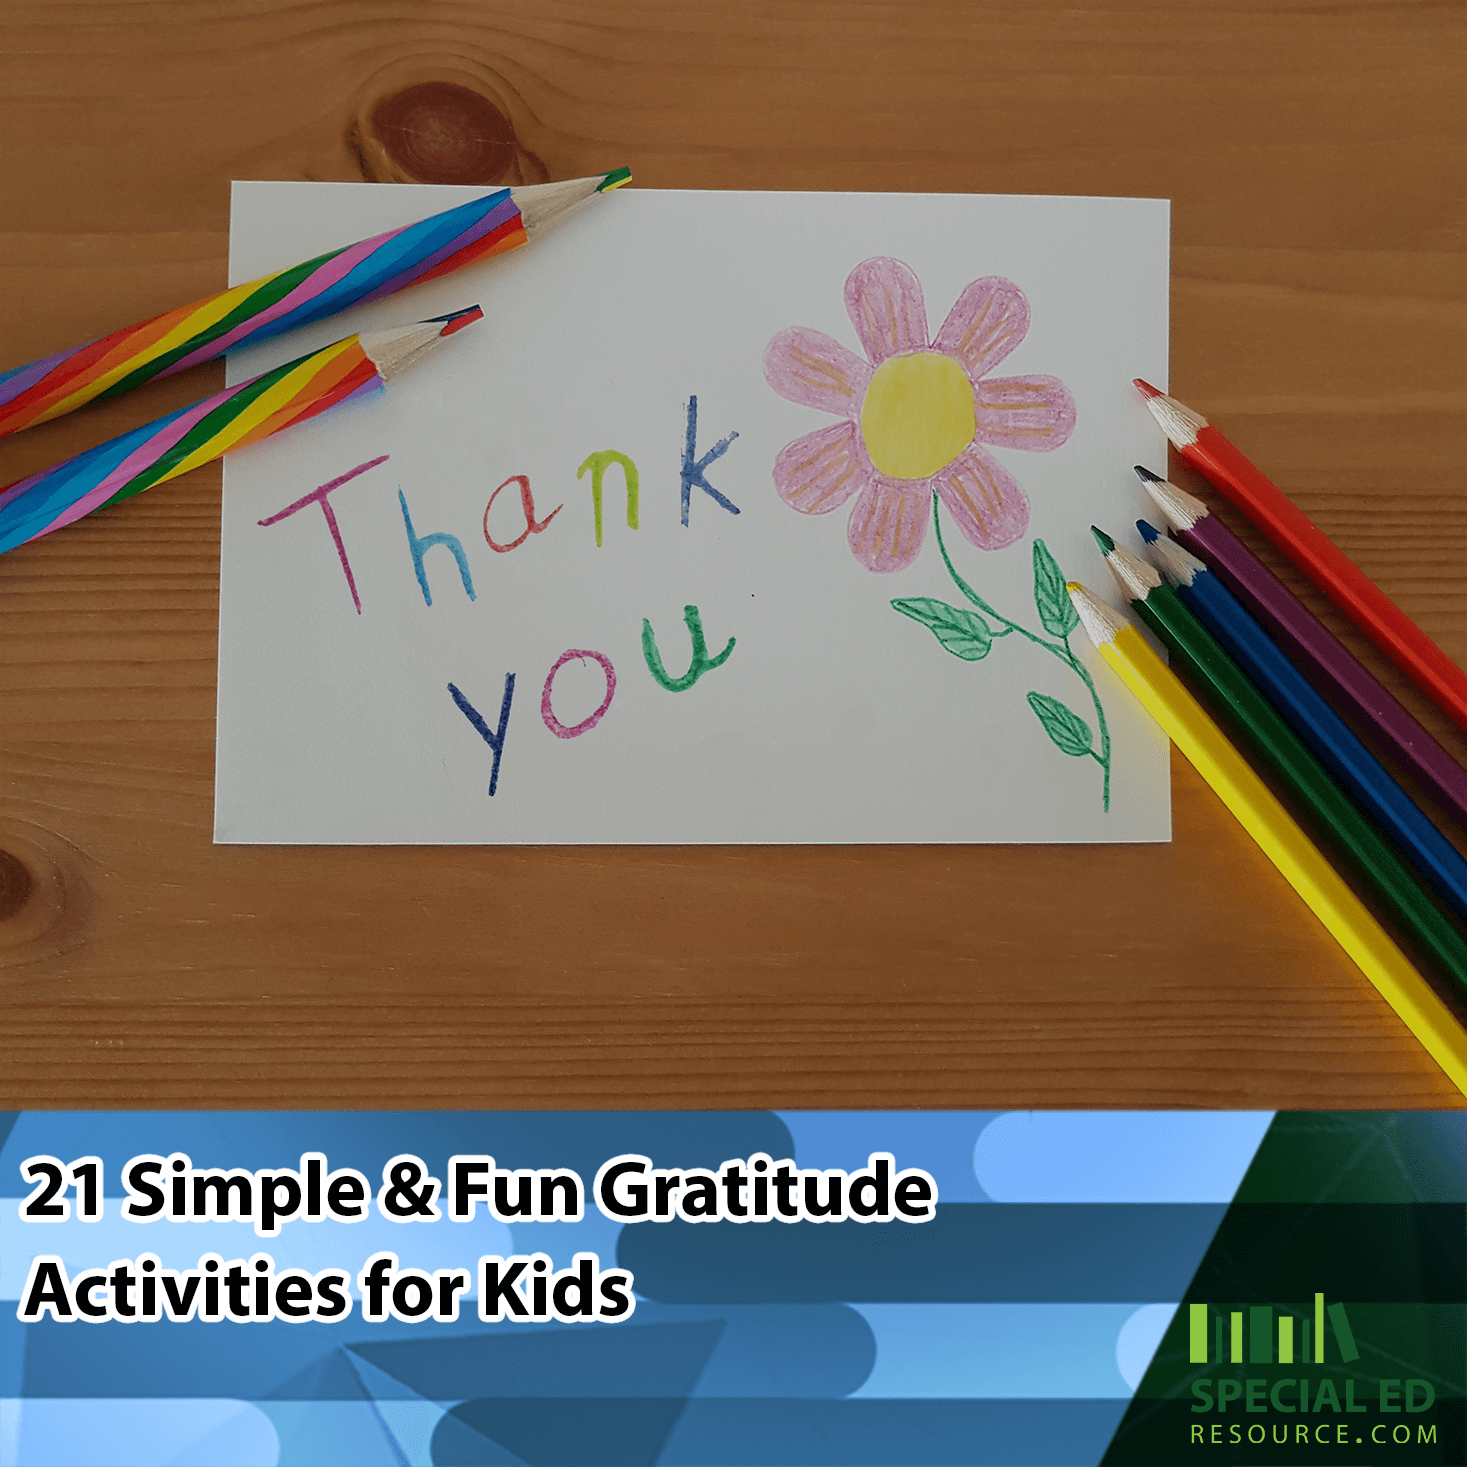 A handmade card with the words thank you written on it sitting on a child’s desk with colored pencils. It is one of the 21 gratitude activities for kids.